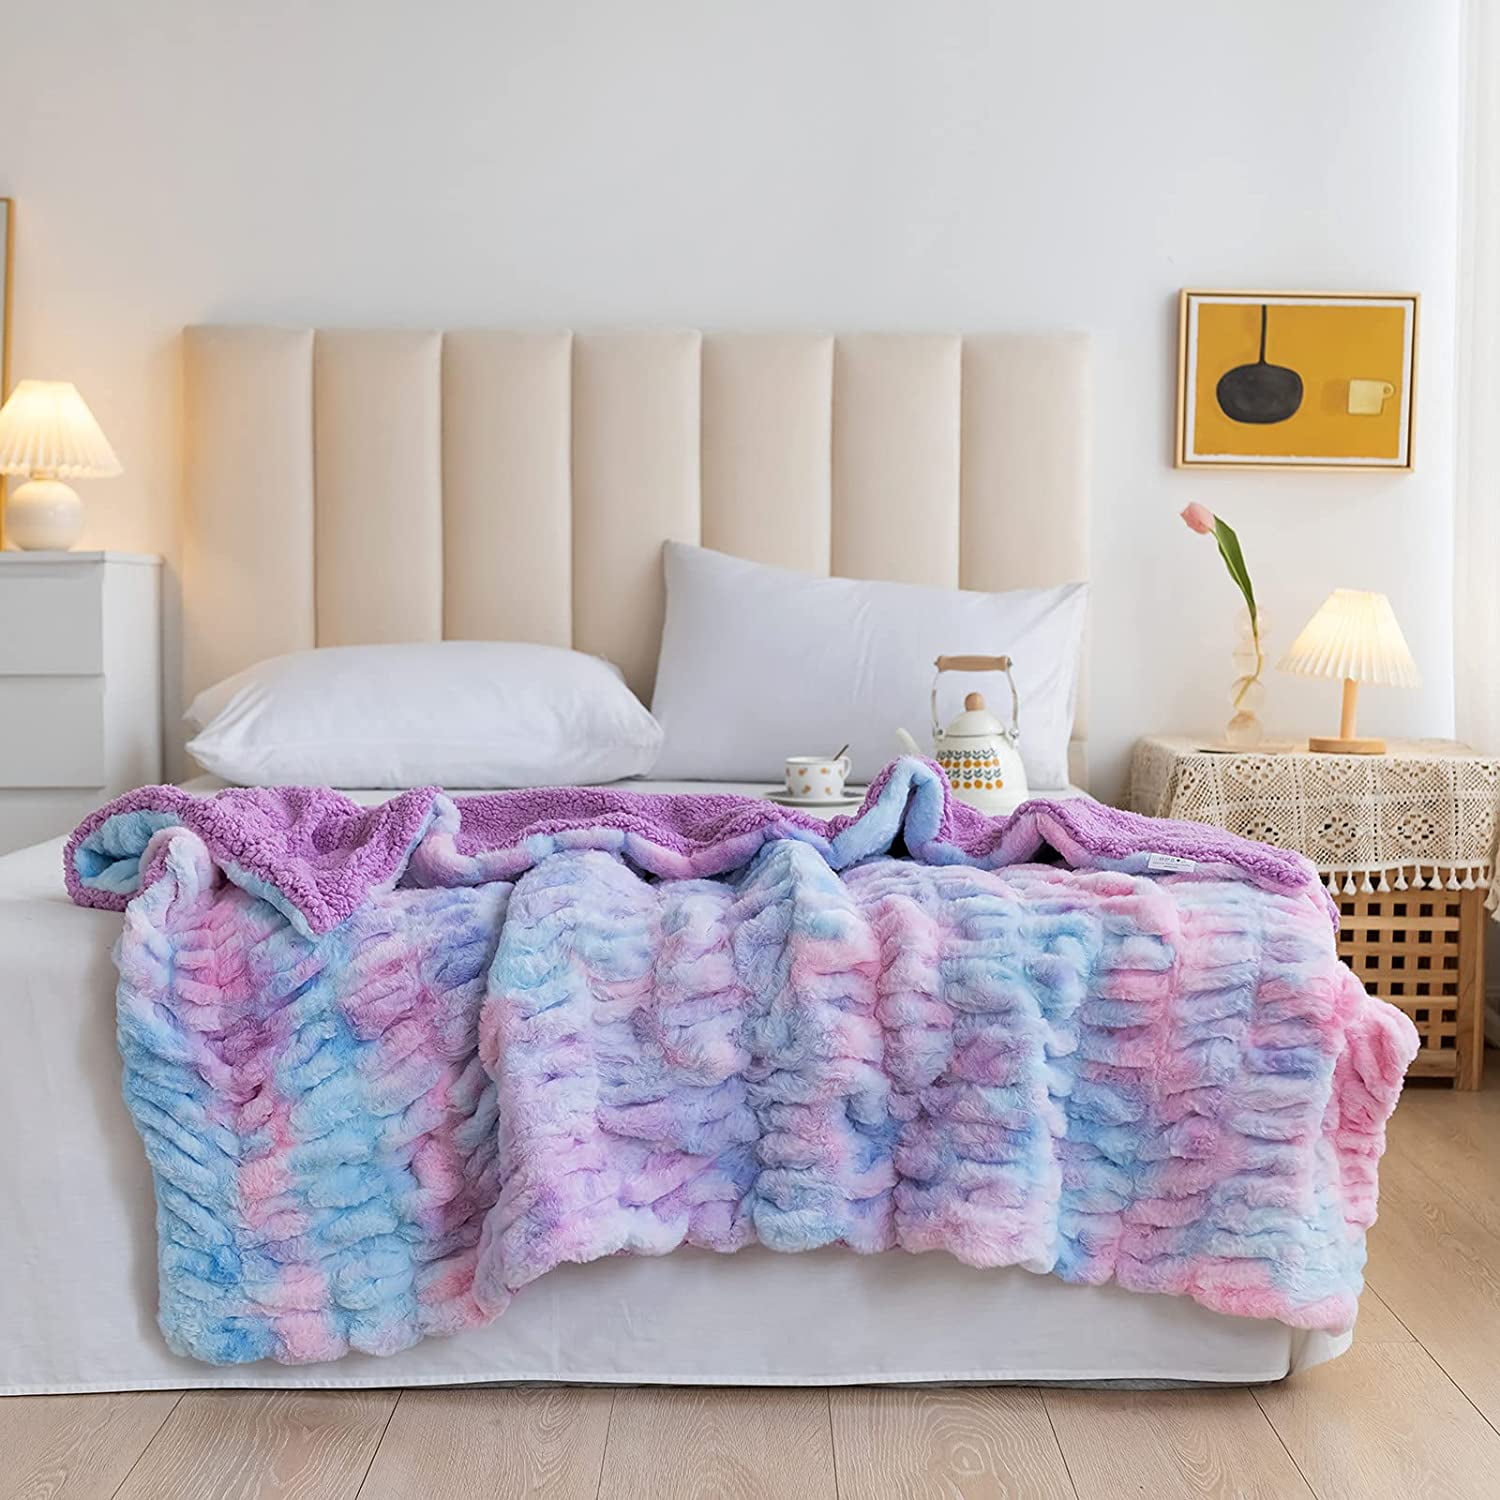 40x50 Purple Rainbow, Throw NEWCOSPLAY Super Soft Faux Fur Throw Blanket Premium Sherpa Backing Warm and Cozy Throw Decorative for Bedroom Sofa Floor